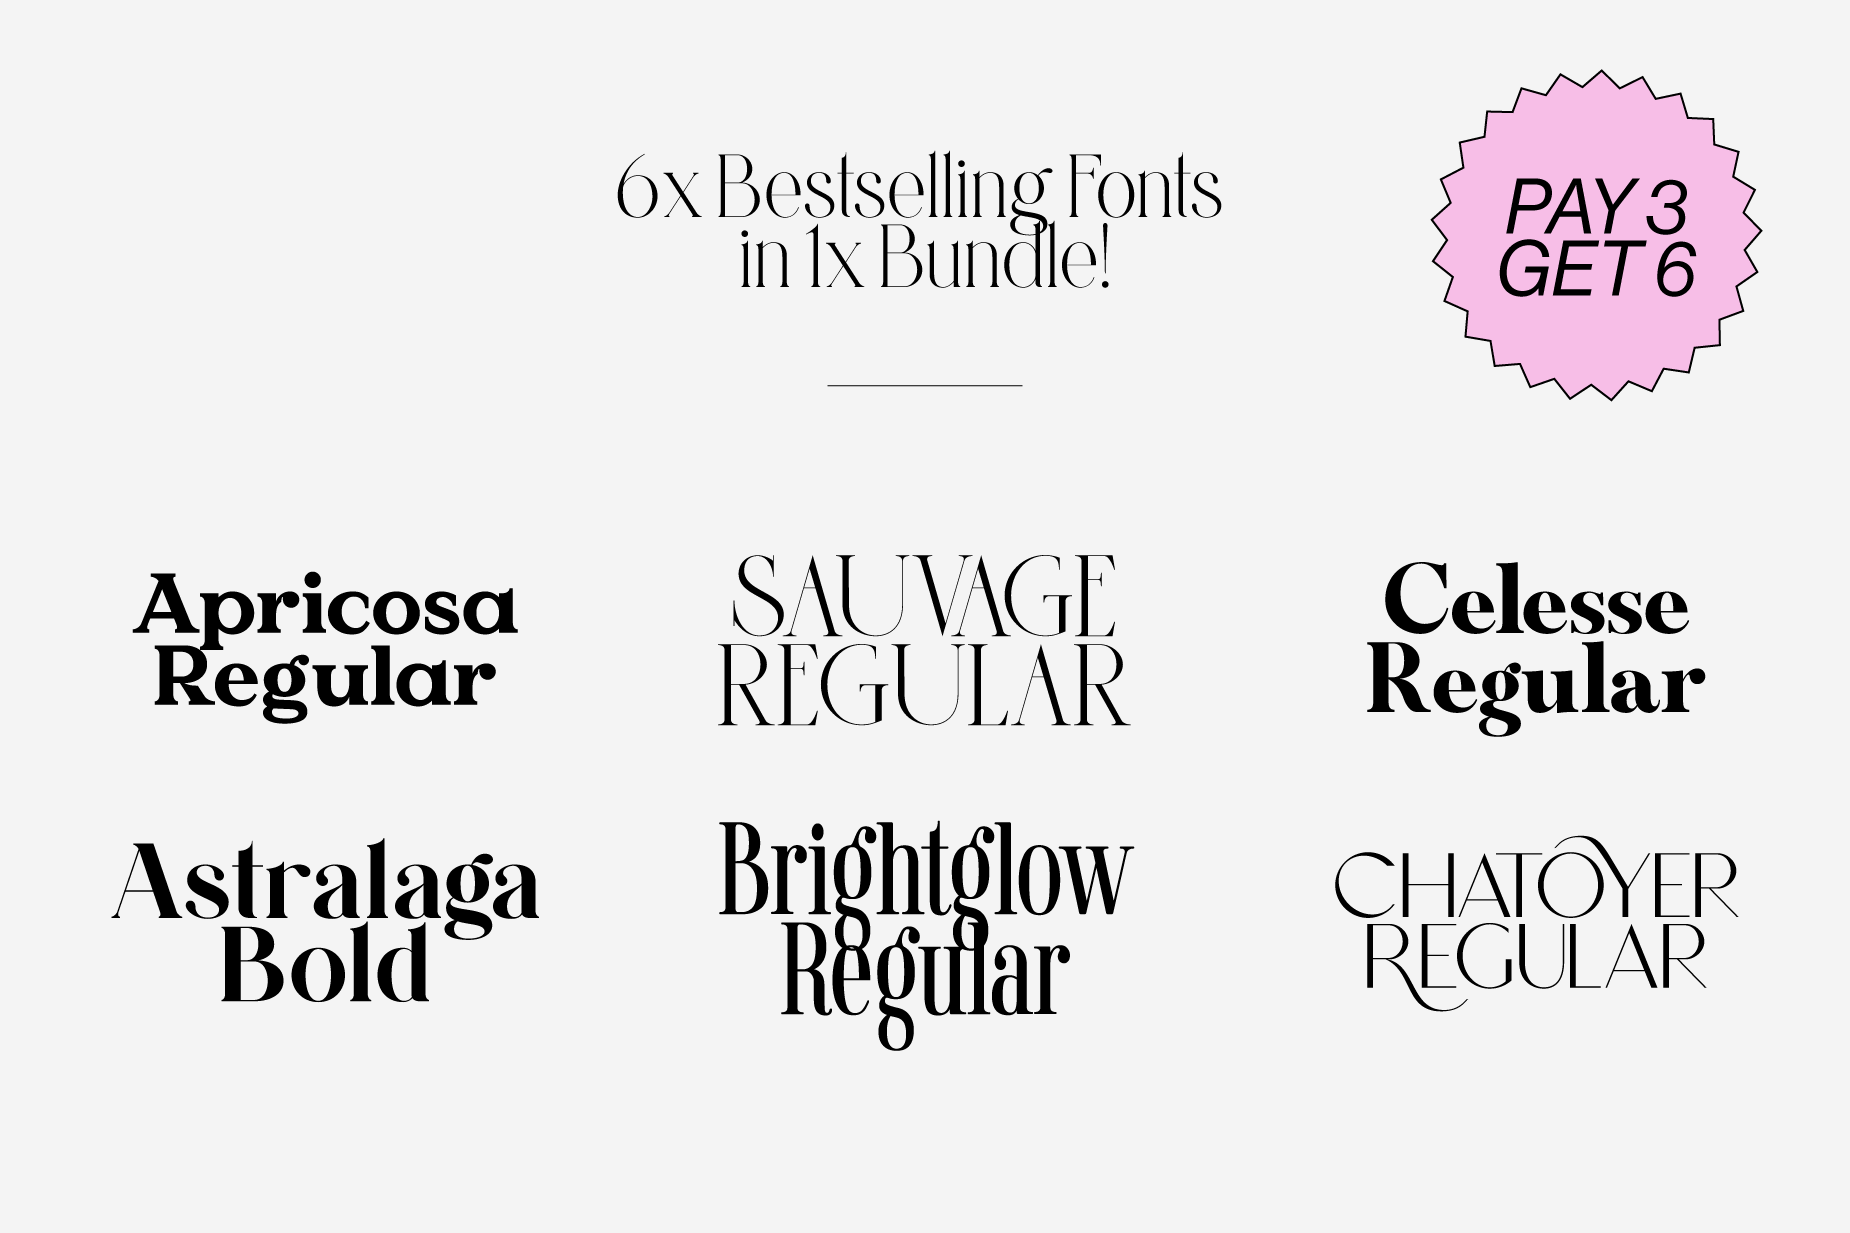 Bestselling Fonts in one bundle: Apricosa, Sauvage, Celesse, Astralaga, Brightglow, Chatoyer